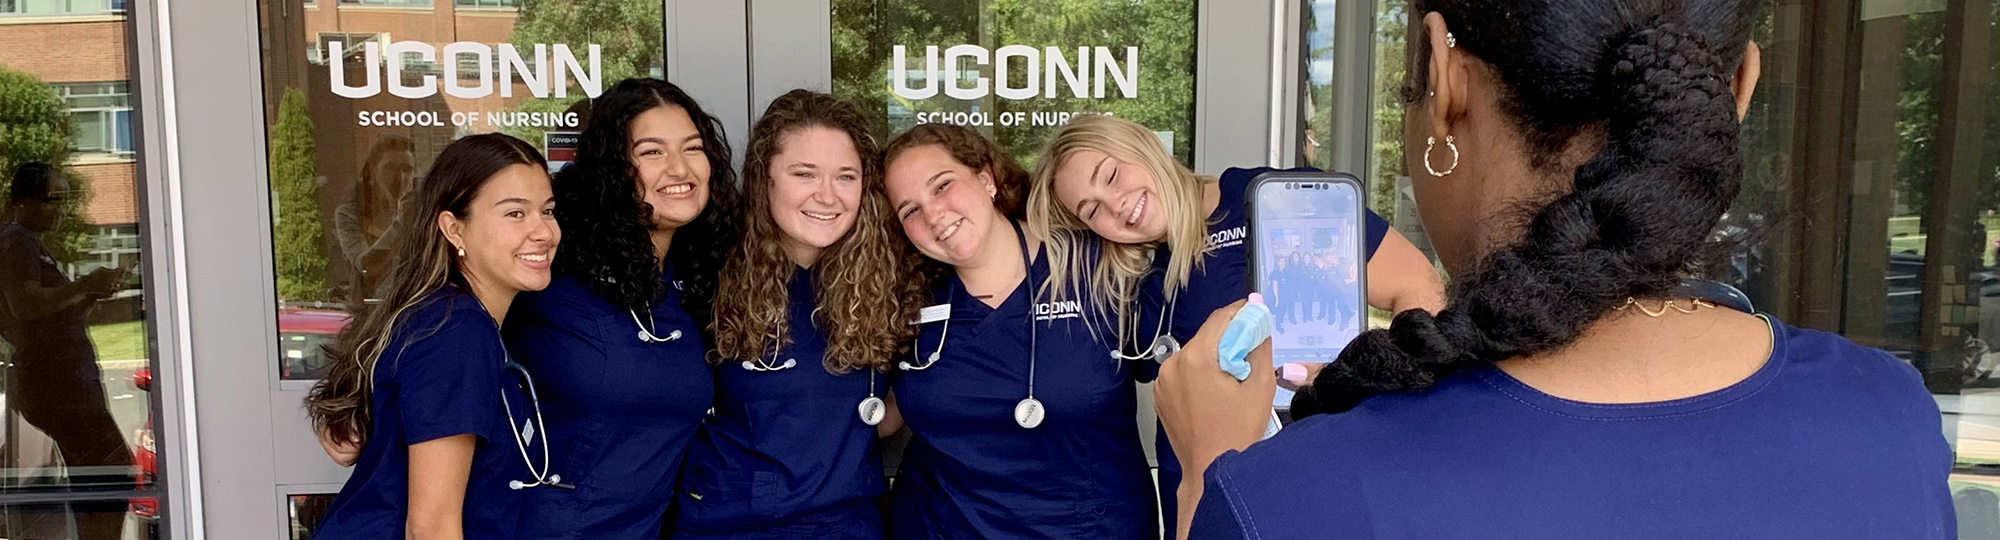 A group of women in scrubs pose in front of a building's doors while another woman takes their photo on a cellphone